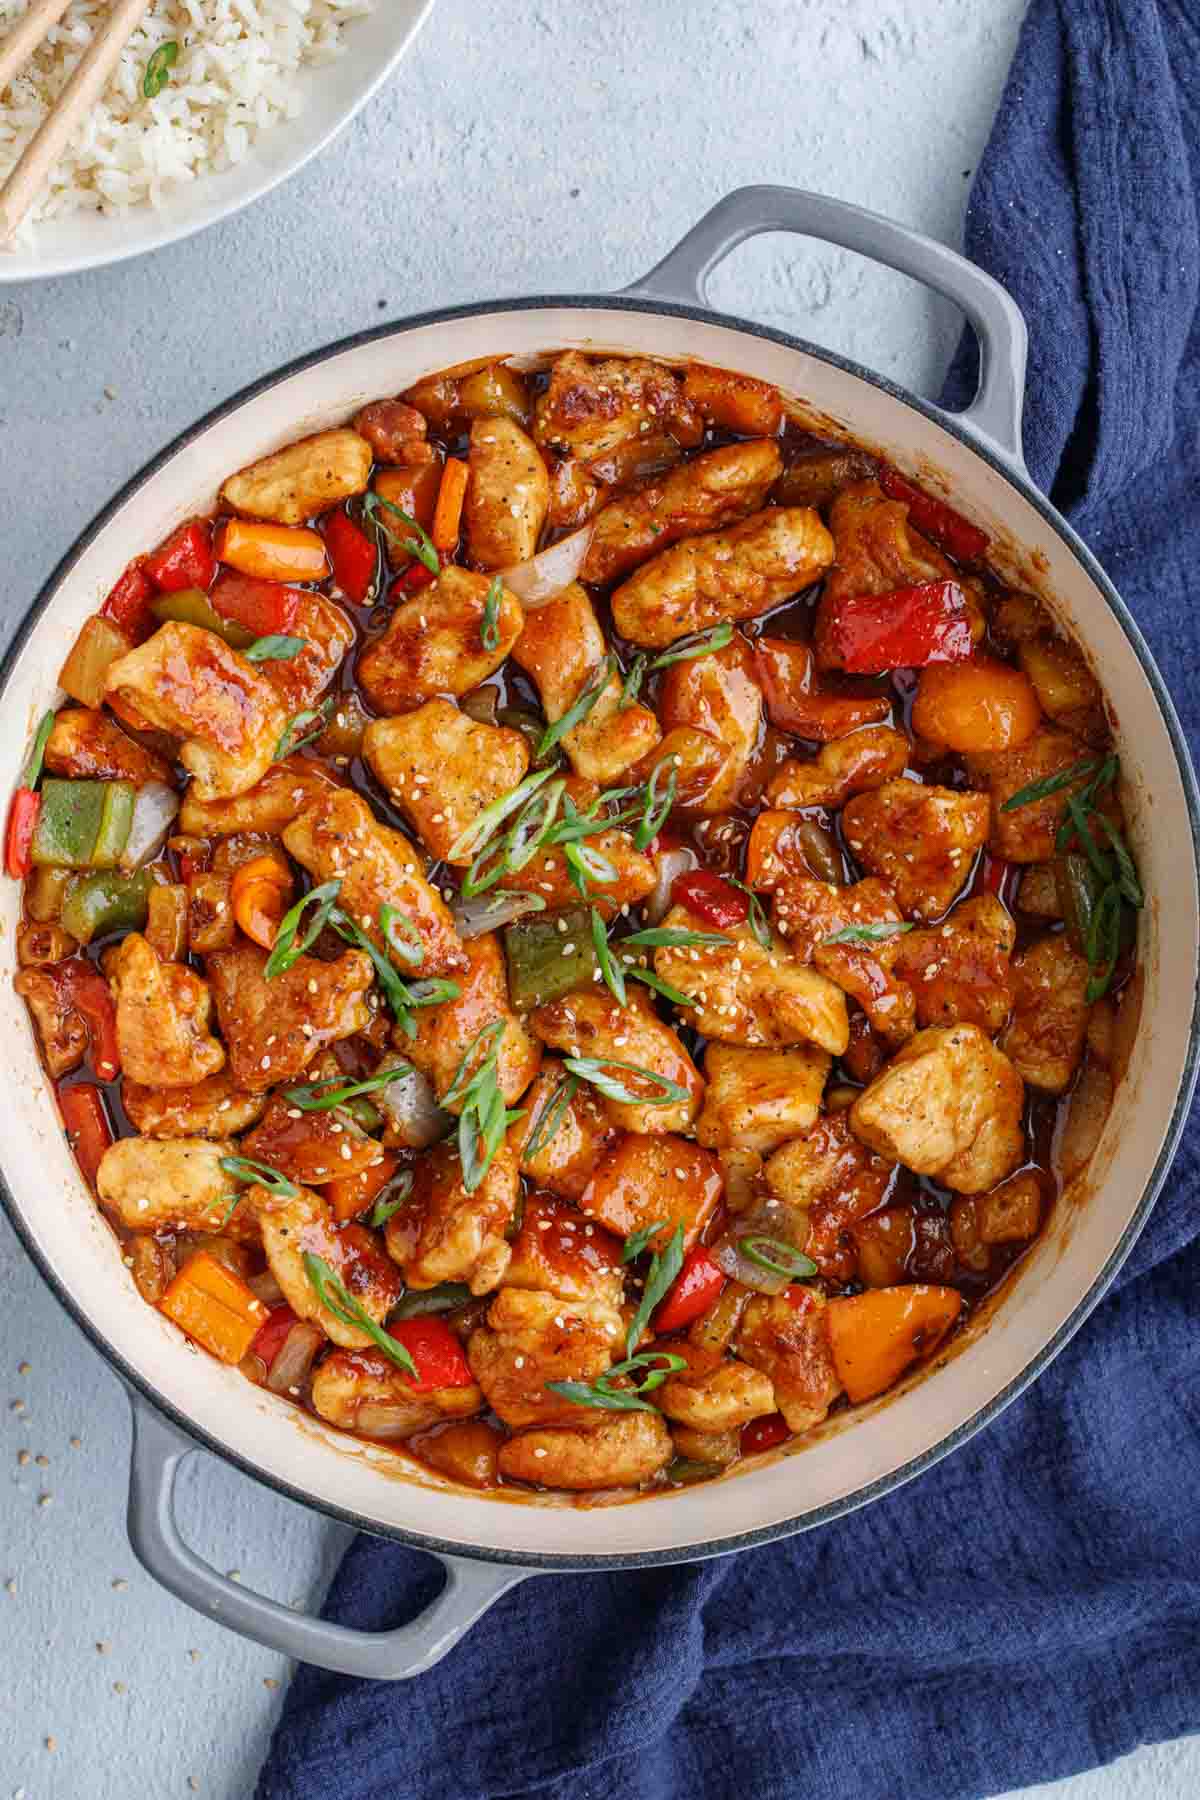 Sweet and sour chicken in skillet topped with greens.